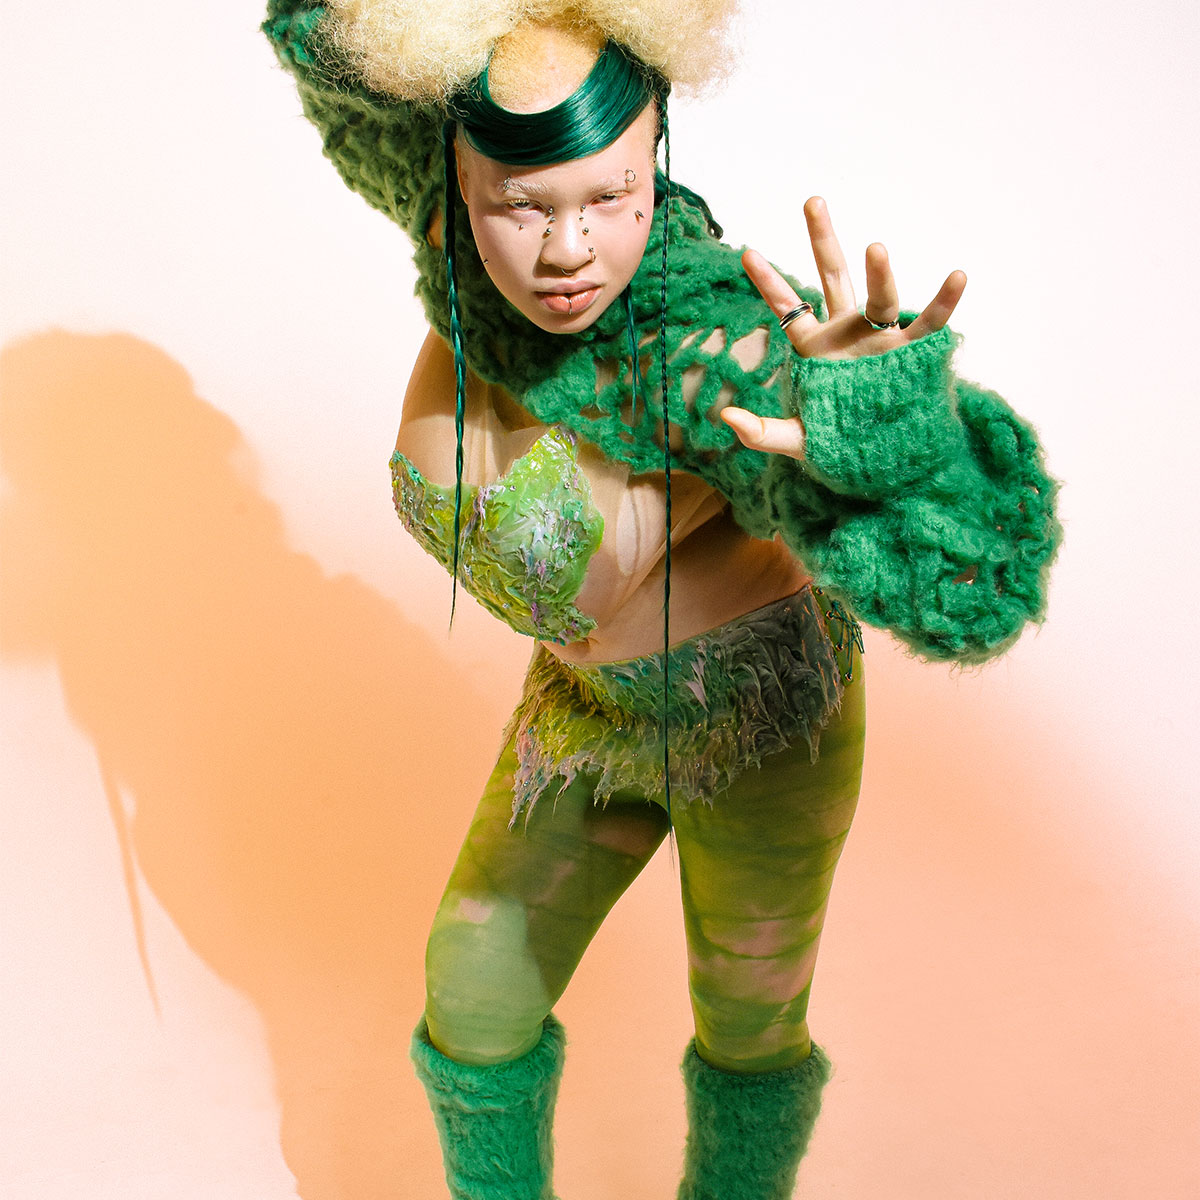 A model is wearing a green crochet shawl, shiny green headpiece, lacey green tights and knit green leg warmers. The model is leaning forward with one hand raised toward the camera.